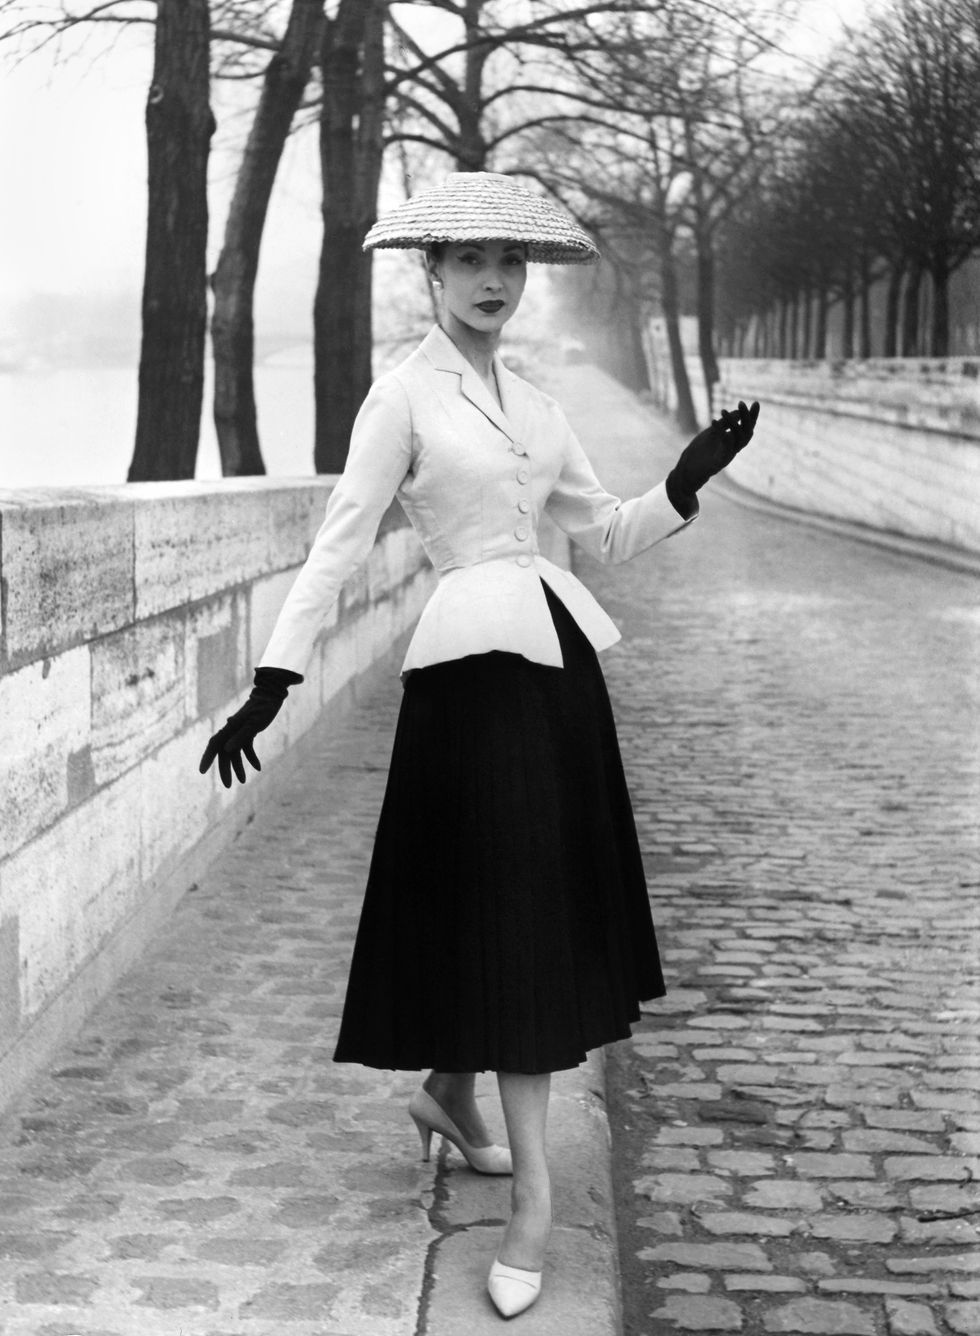 womens fashion dior, 1947 nwoman wearing an outfit designed by christian dior, 1947